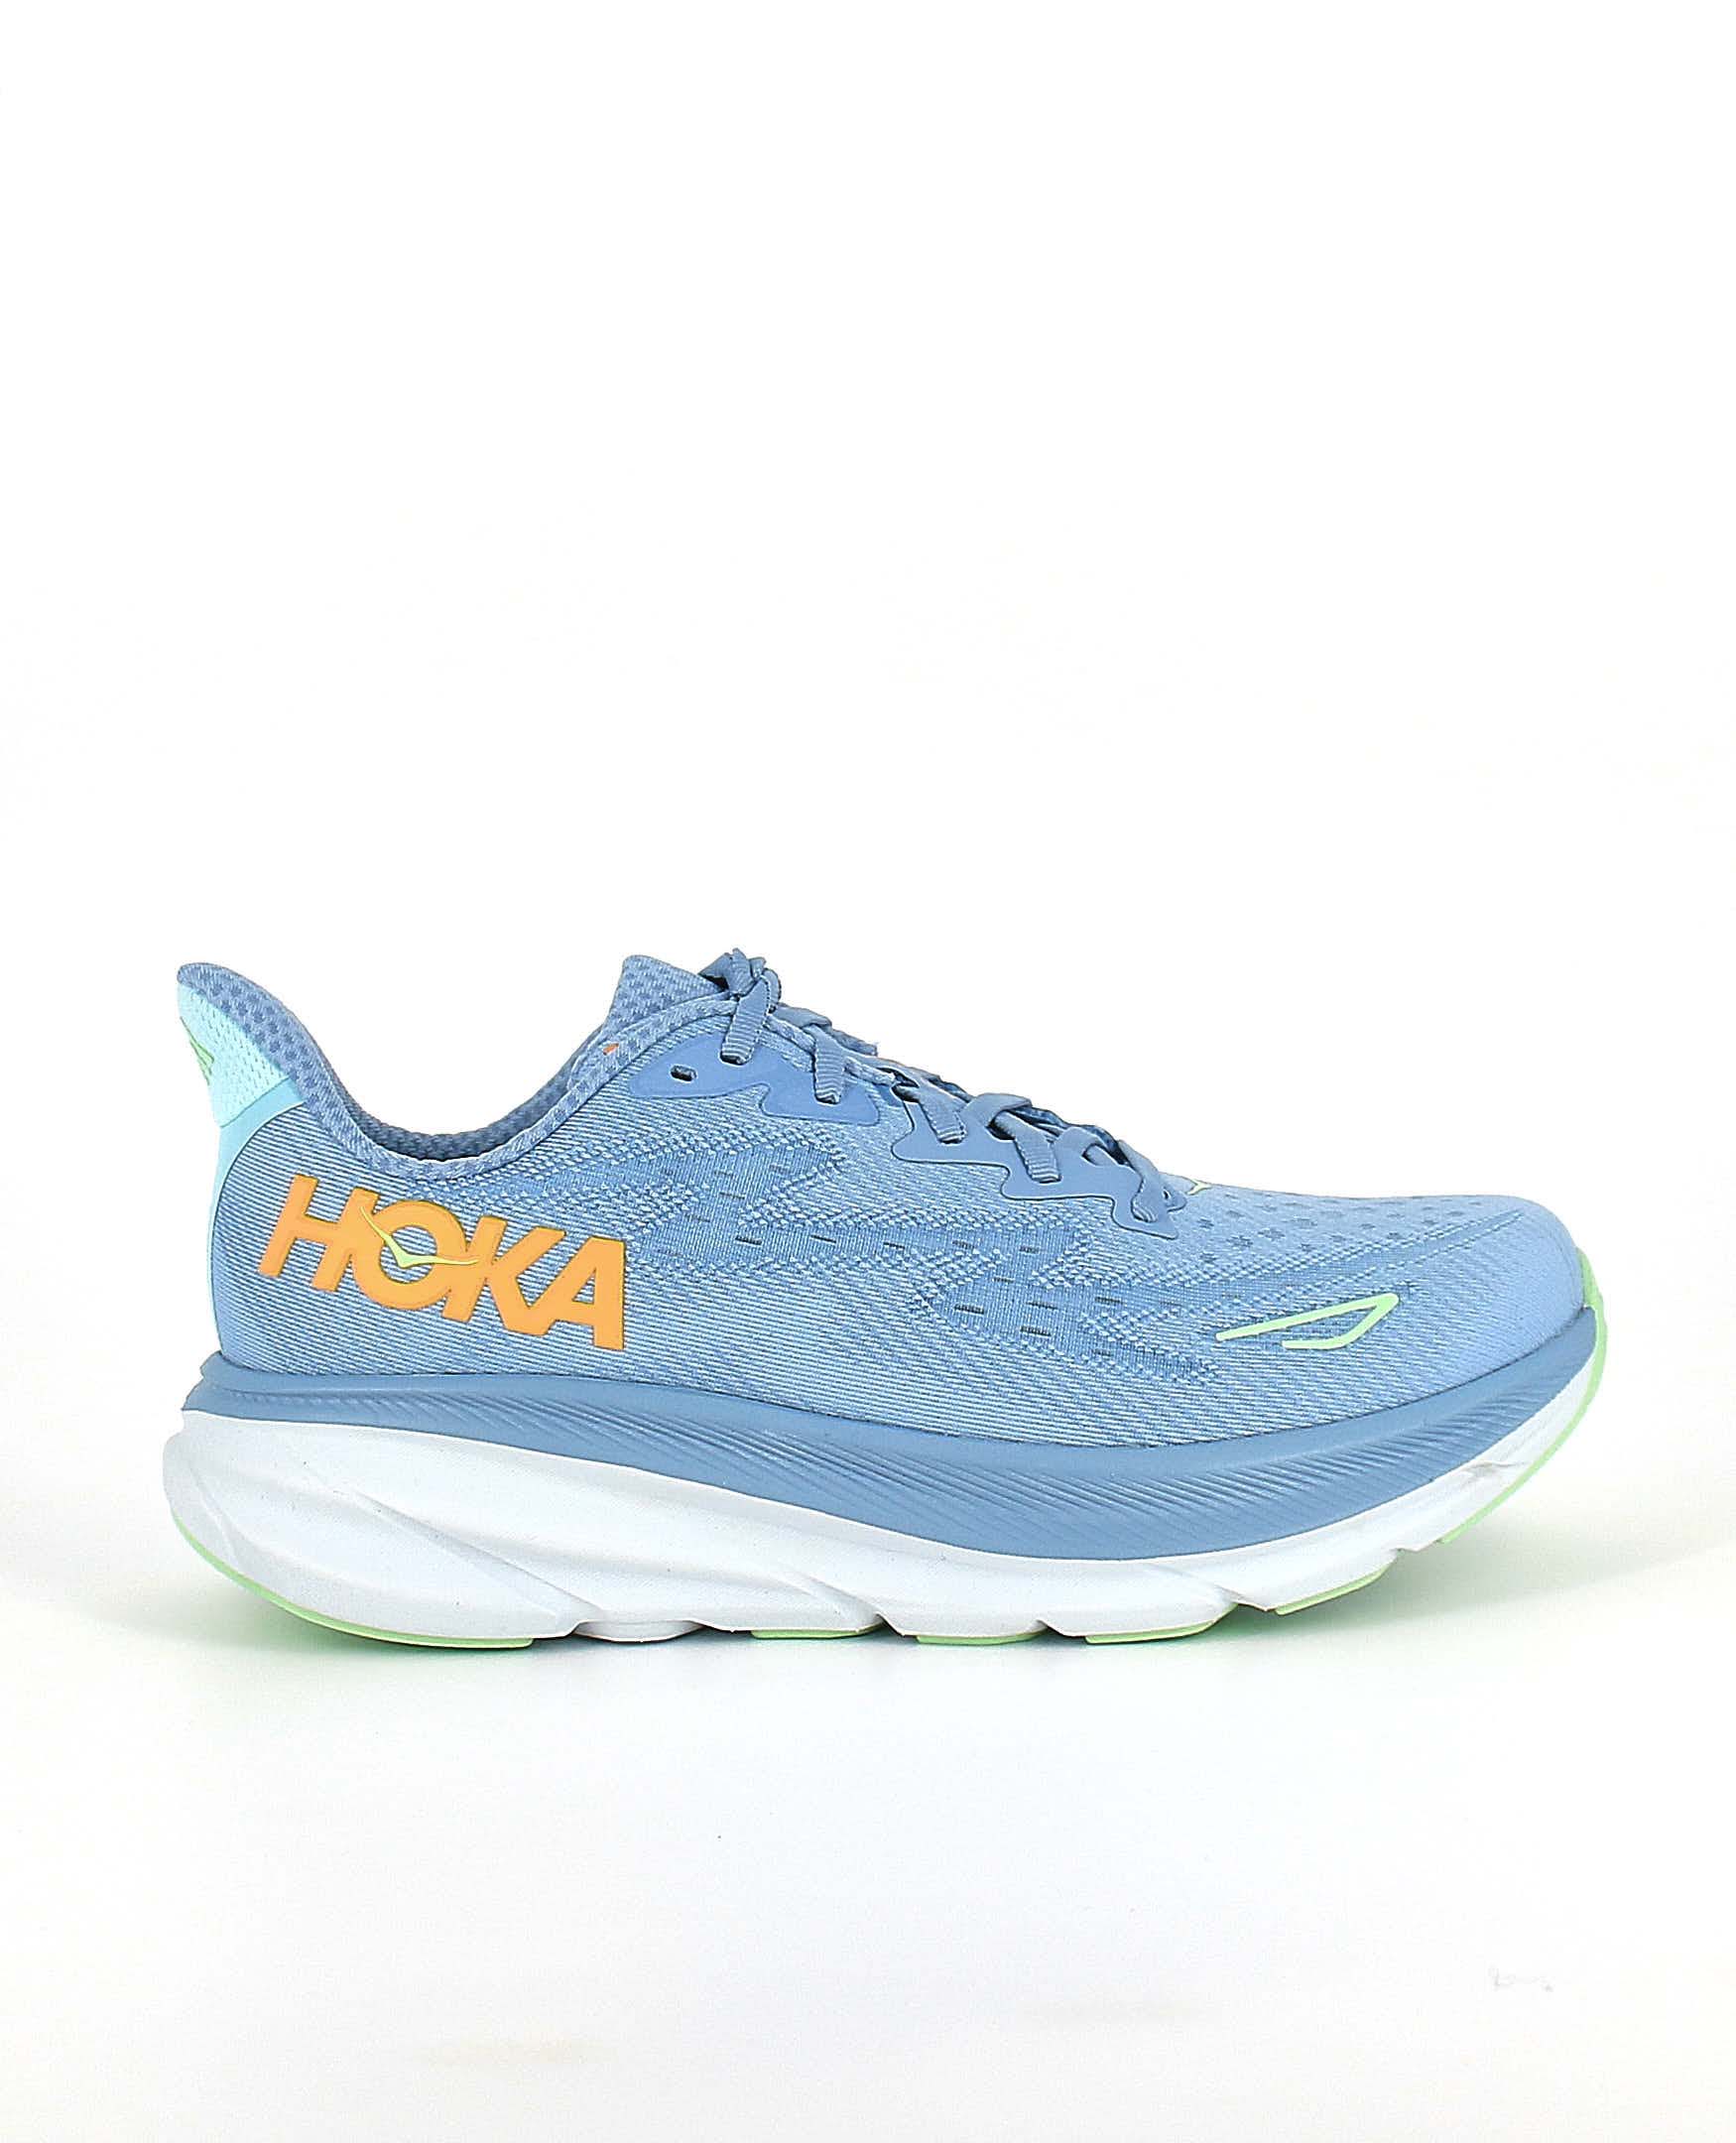 The side of the HOKA Clifton 9, in Dusk/Illusion.